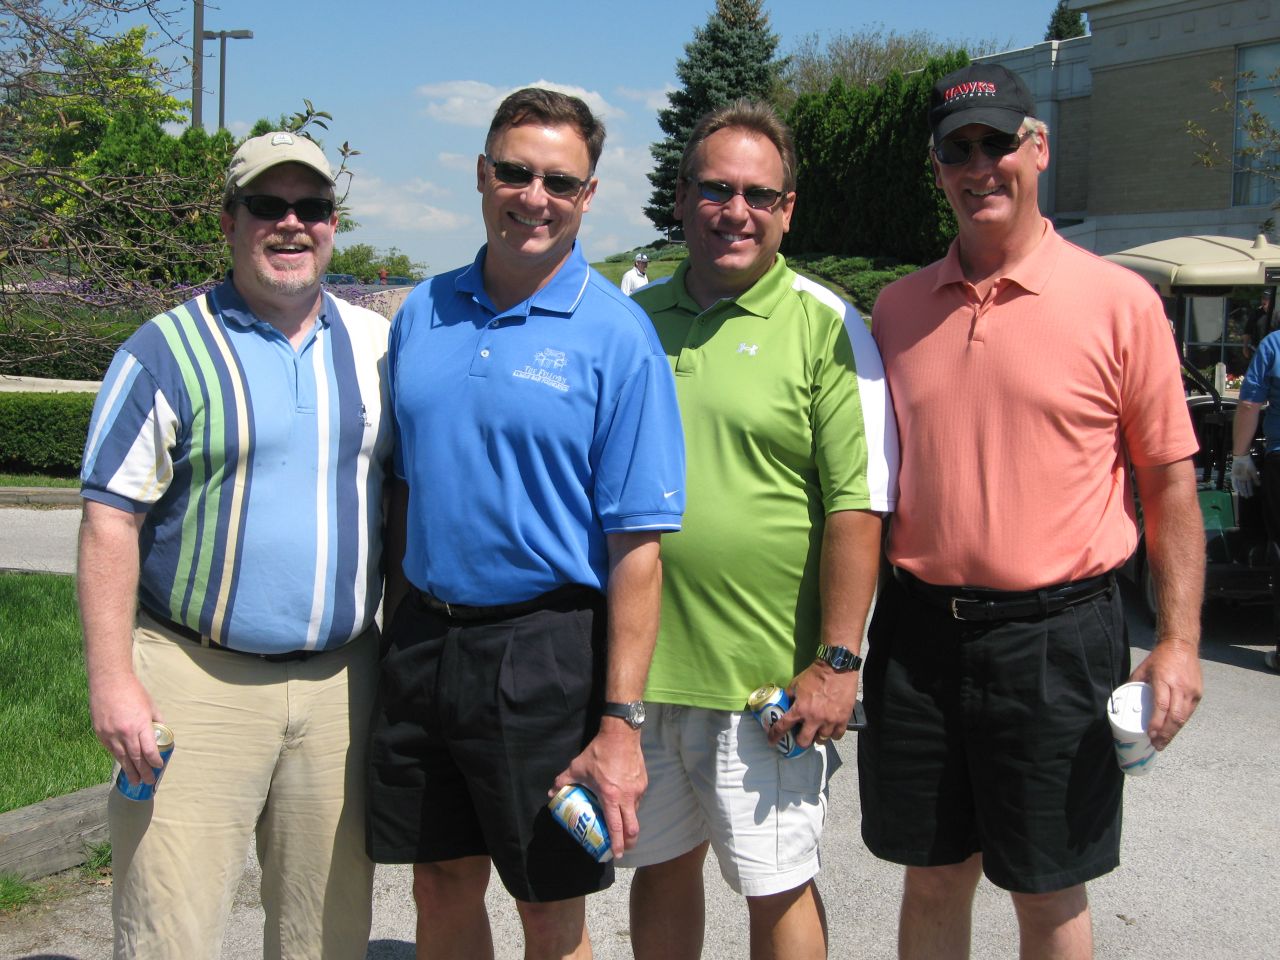 ISBA 2nd Vice President John Locallo (second from left) with the other members of his golf foursome.